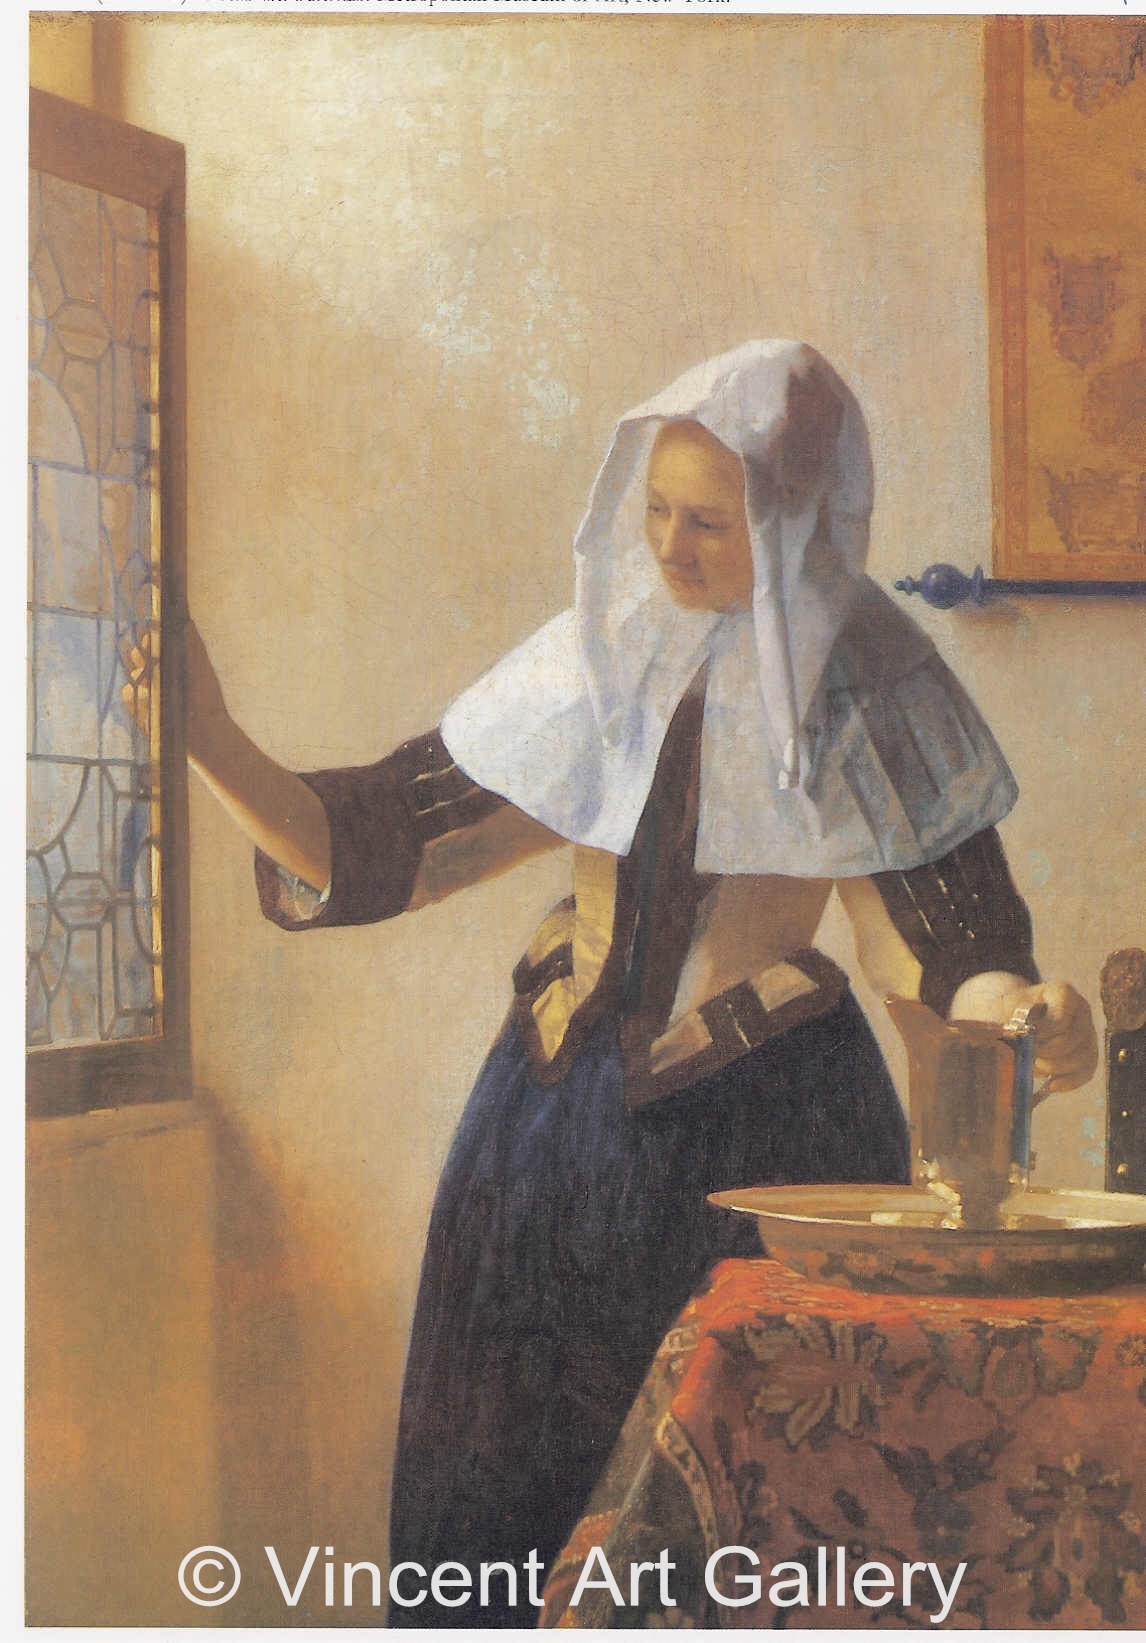 A113, VERMEER, Woman with a Water Jug, Left Side